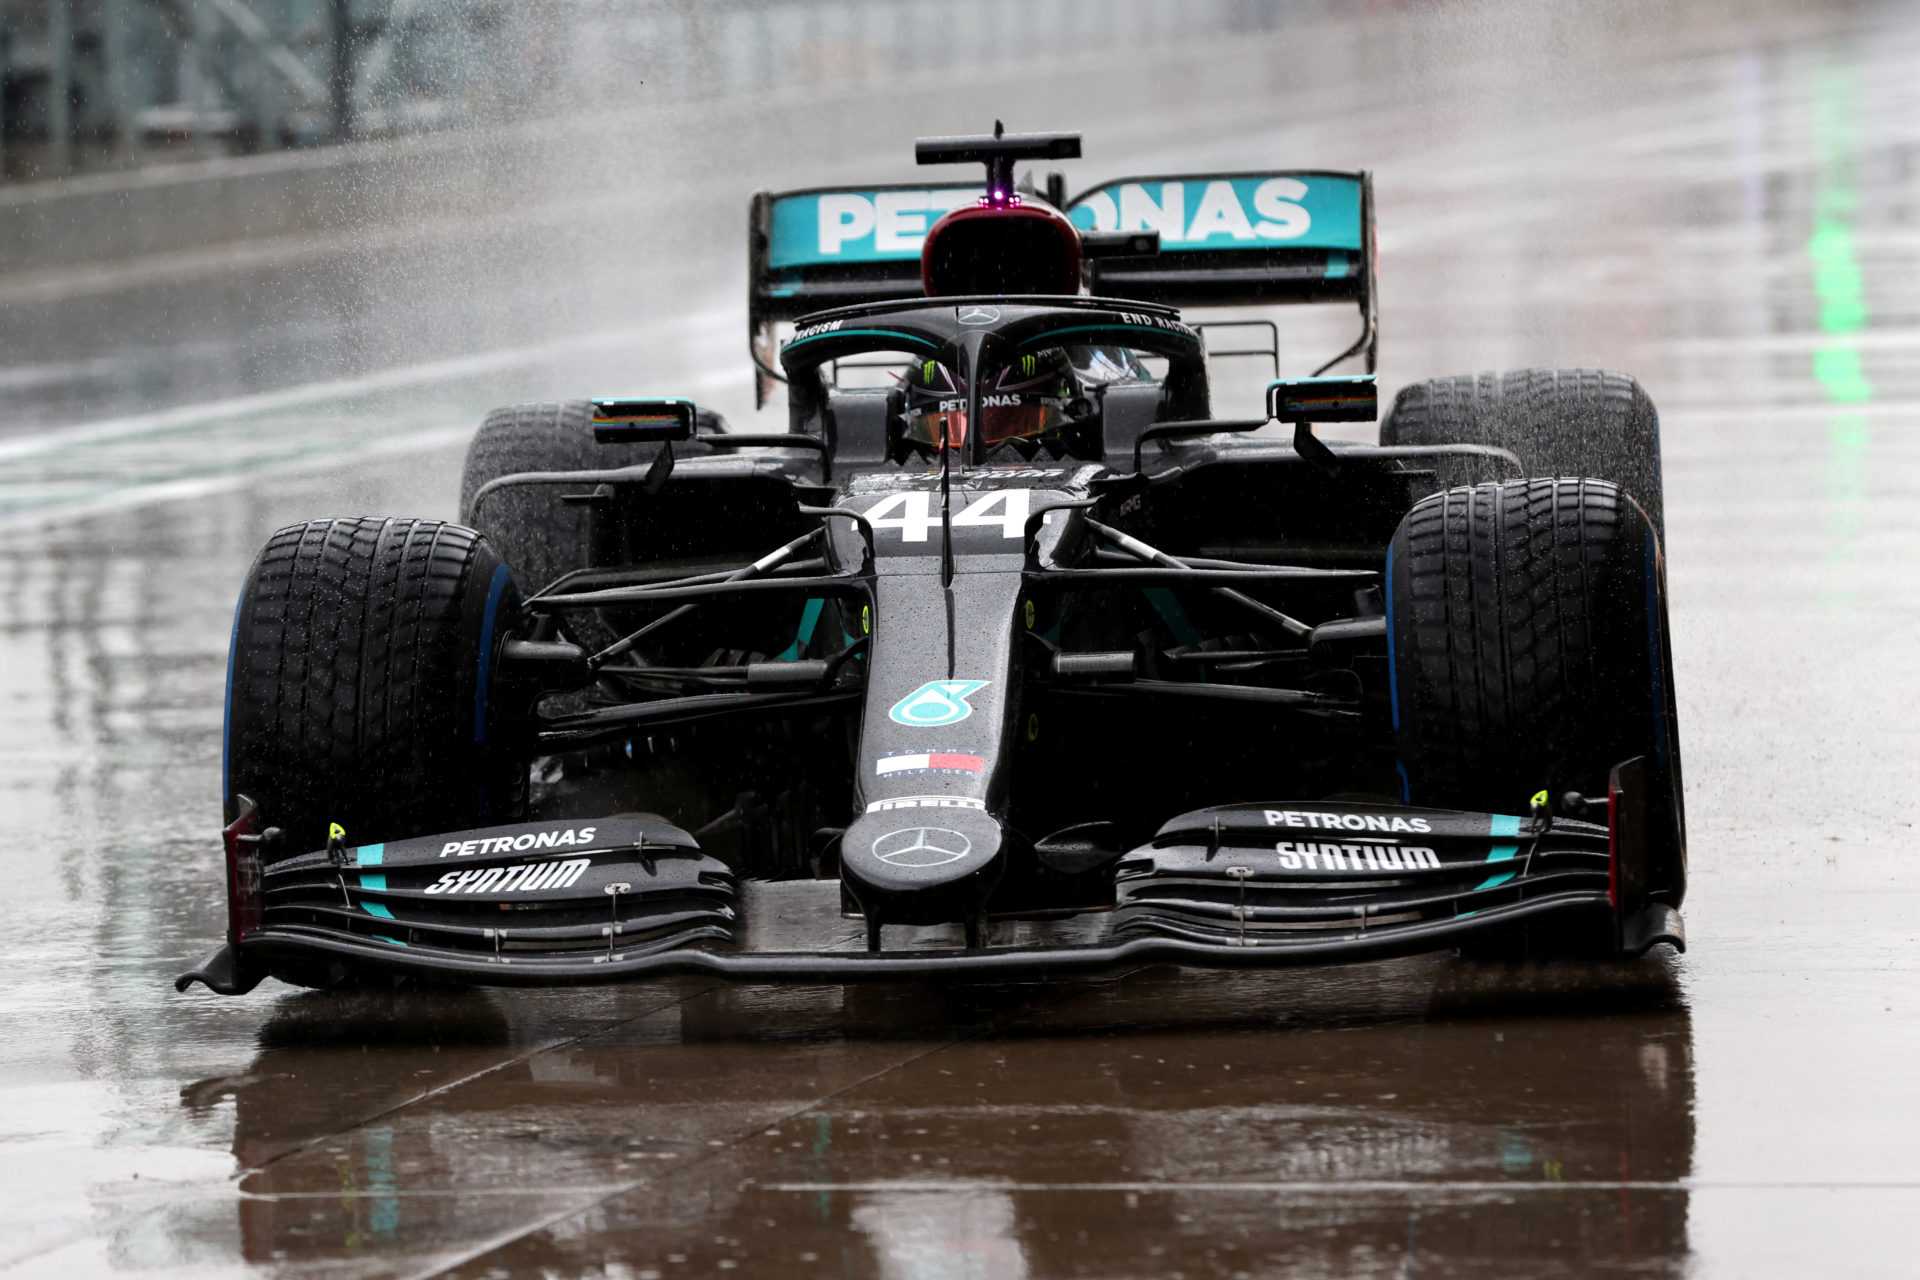 Lewis Hamilton in action at during qualifying at the Turkish GP